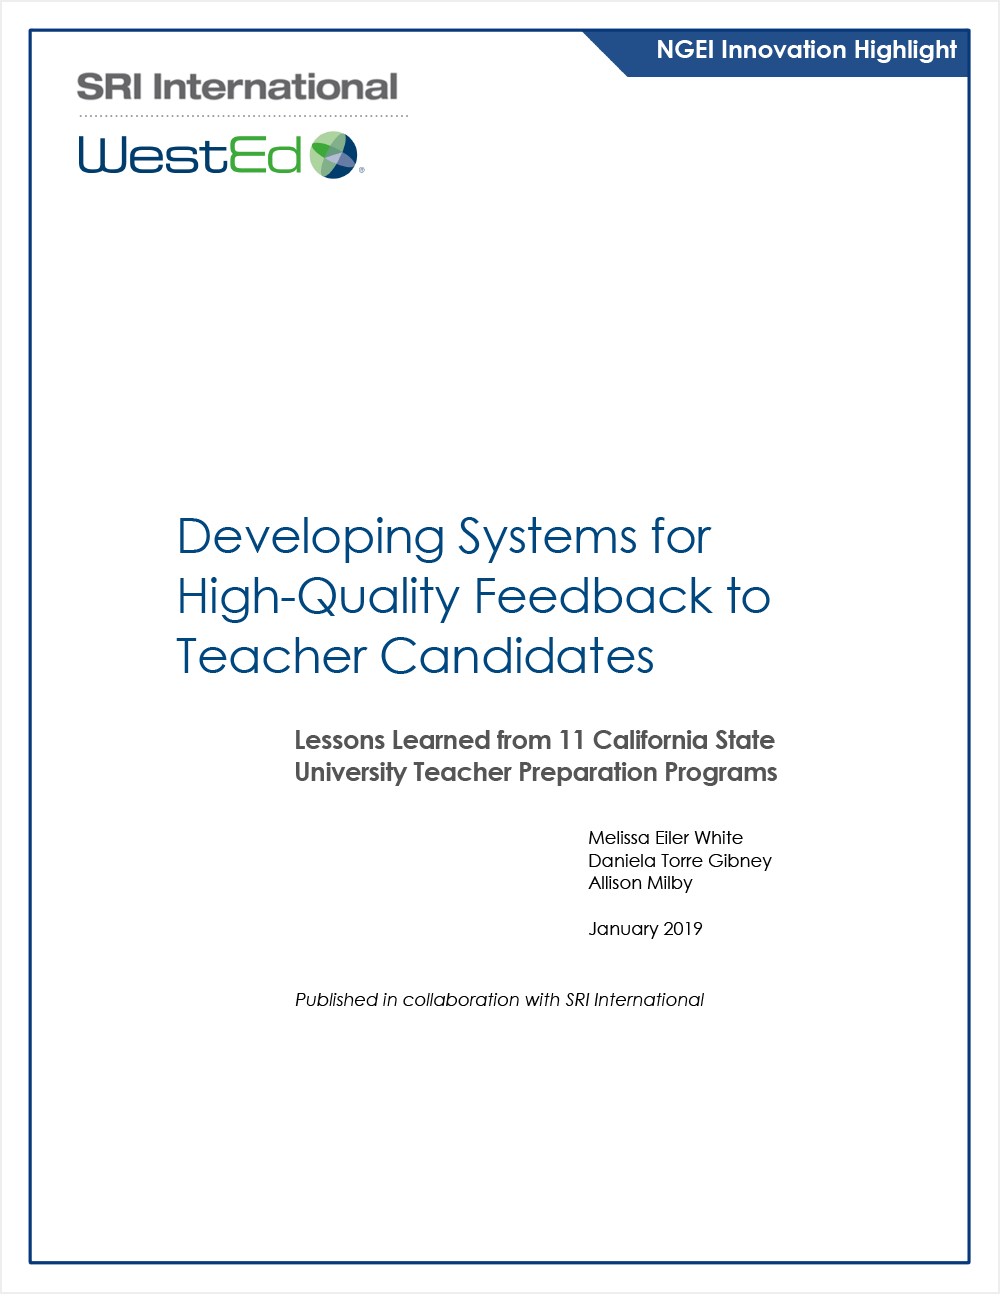 Developing Systems for High-Quality Feedback to Teacher Candidates